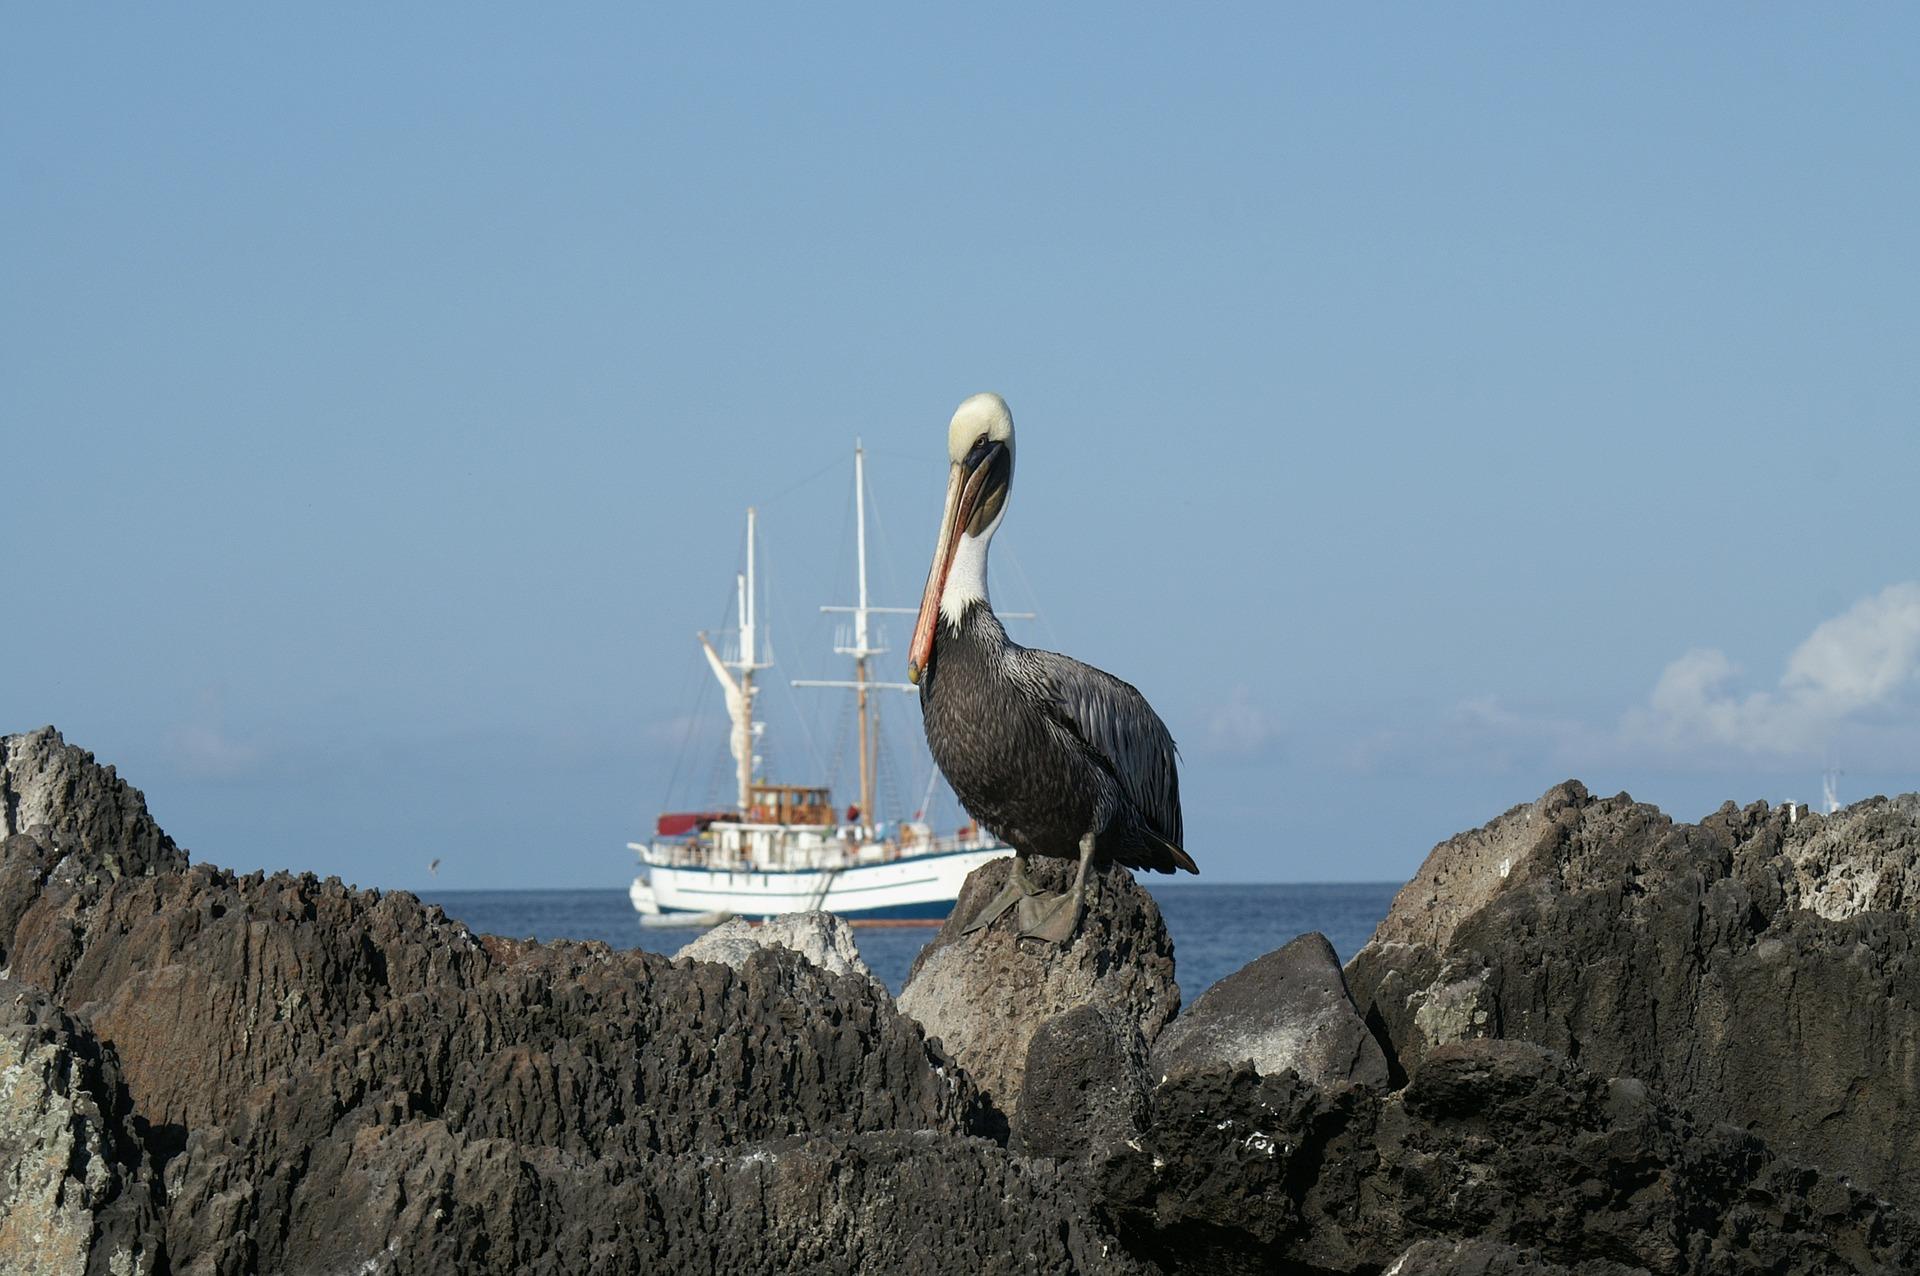 Forget Charles Darwin: Here are 15 Amazing Travel Experiences in the Galapagos Islands